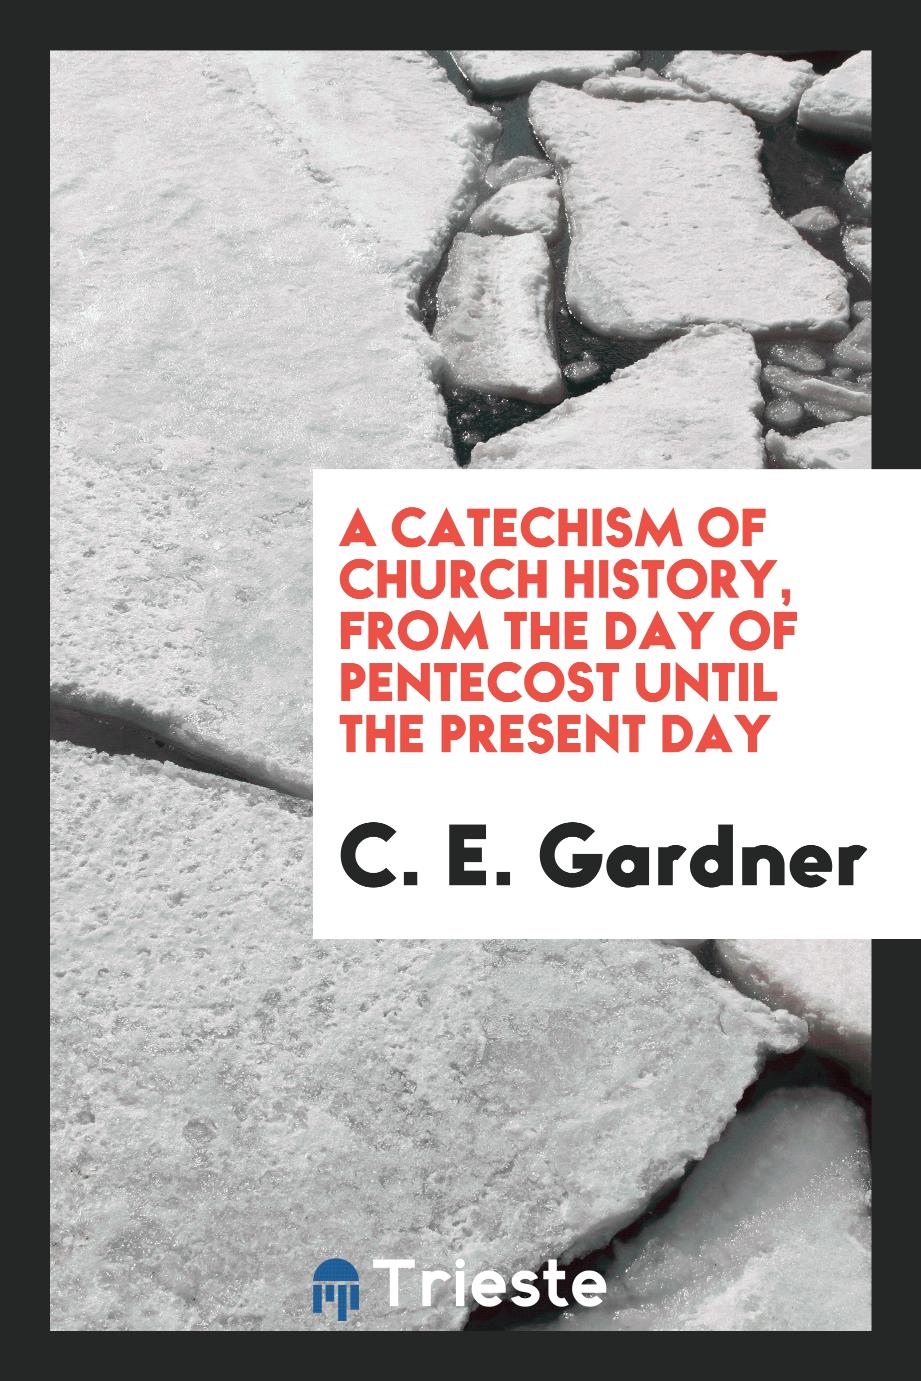 A catechism of church history, from the day of Pentecost until the present day